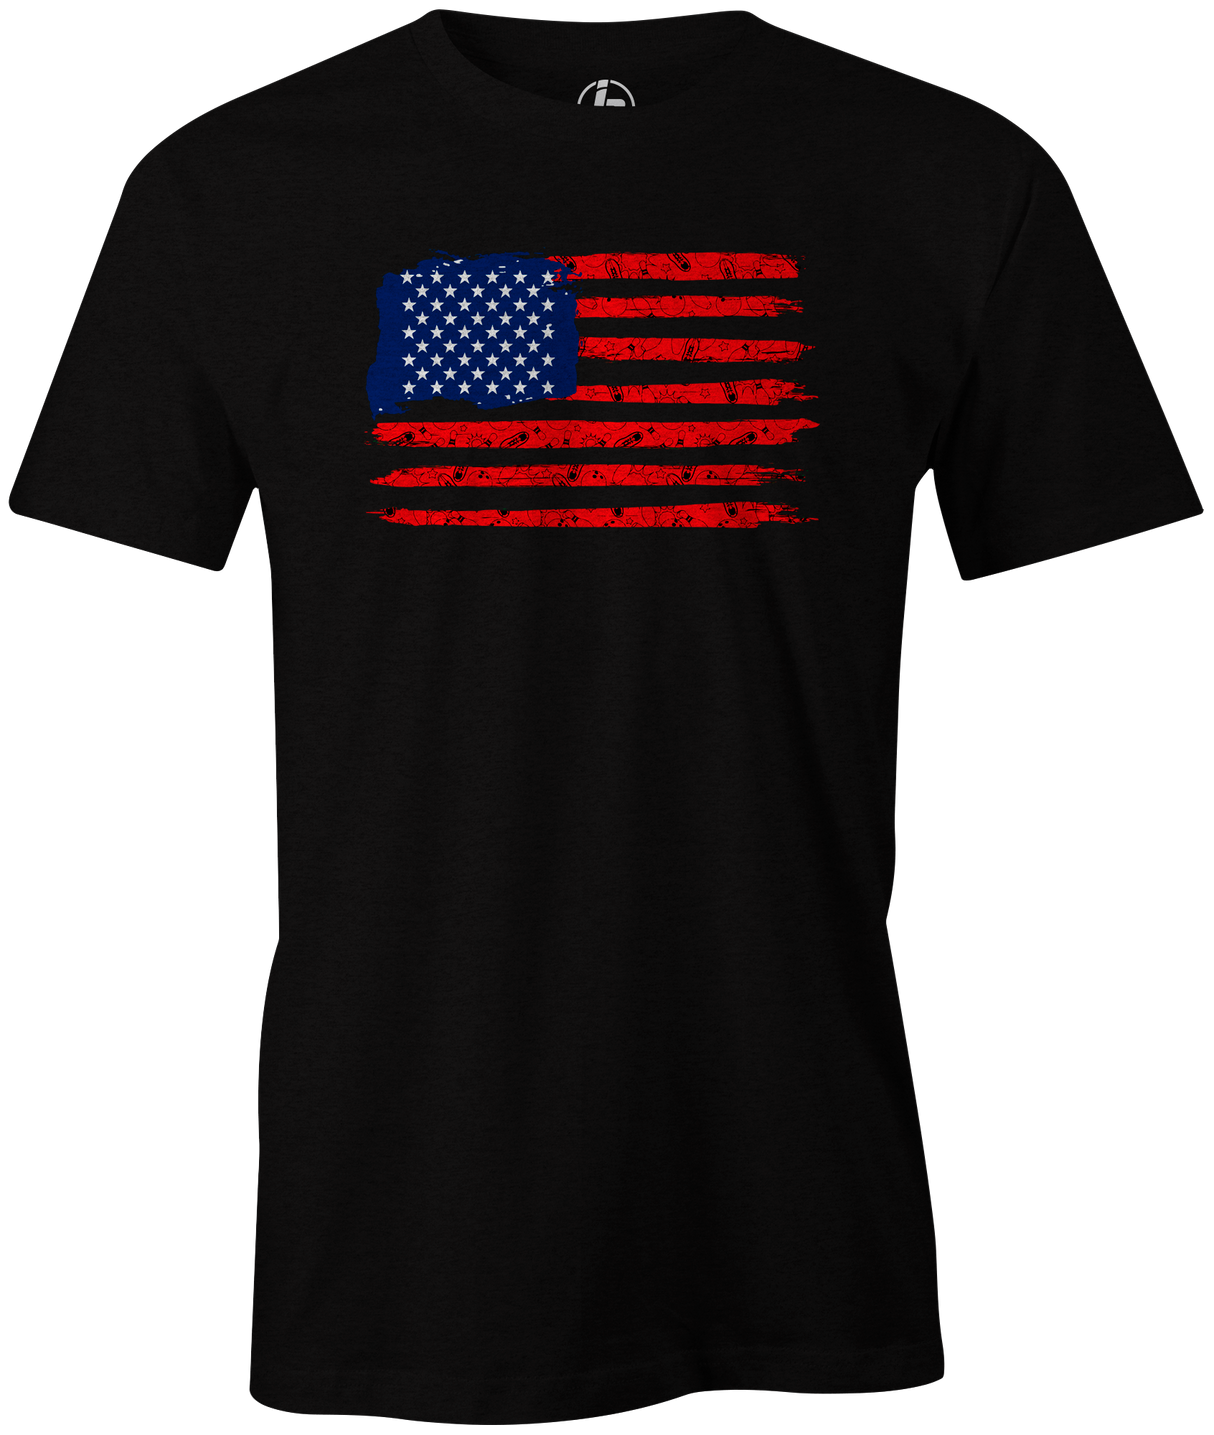 USA Bowling Men's T-shirt, White, Cool, tshirt, tee, tee-shirt, tee shirt, America, Team USA, Bowling USA Bowling! Enjoy this unique bowling themed American flag. Support Team USA with this cool, patriotic t-shirt! America. Tshirt, tee, tee-shirt, tee shirt. United States. Novelty. This is the perfect gift for any bowler looking to show some support for their country. Present. USBC Team USA. Comfortable. Free shipping. 